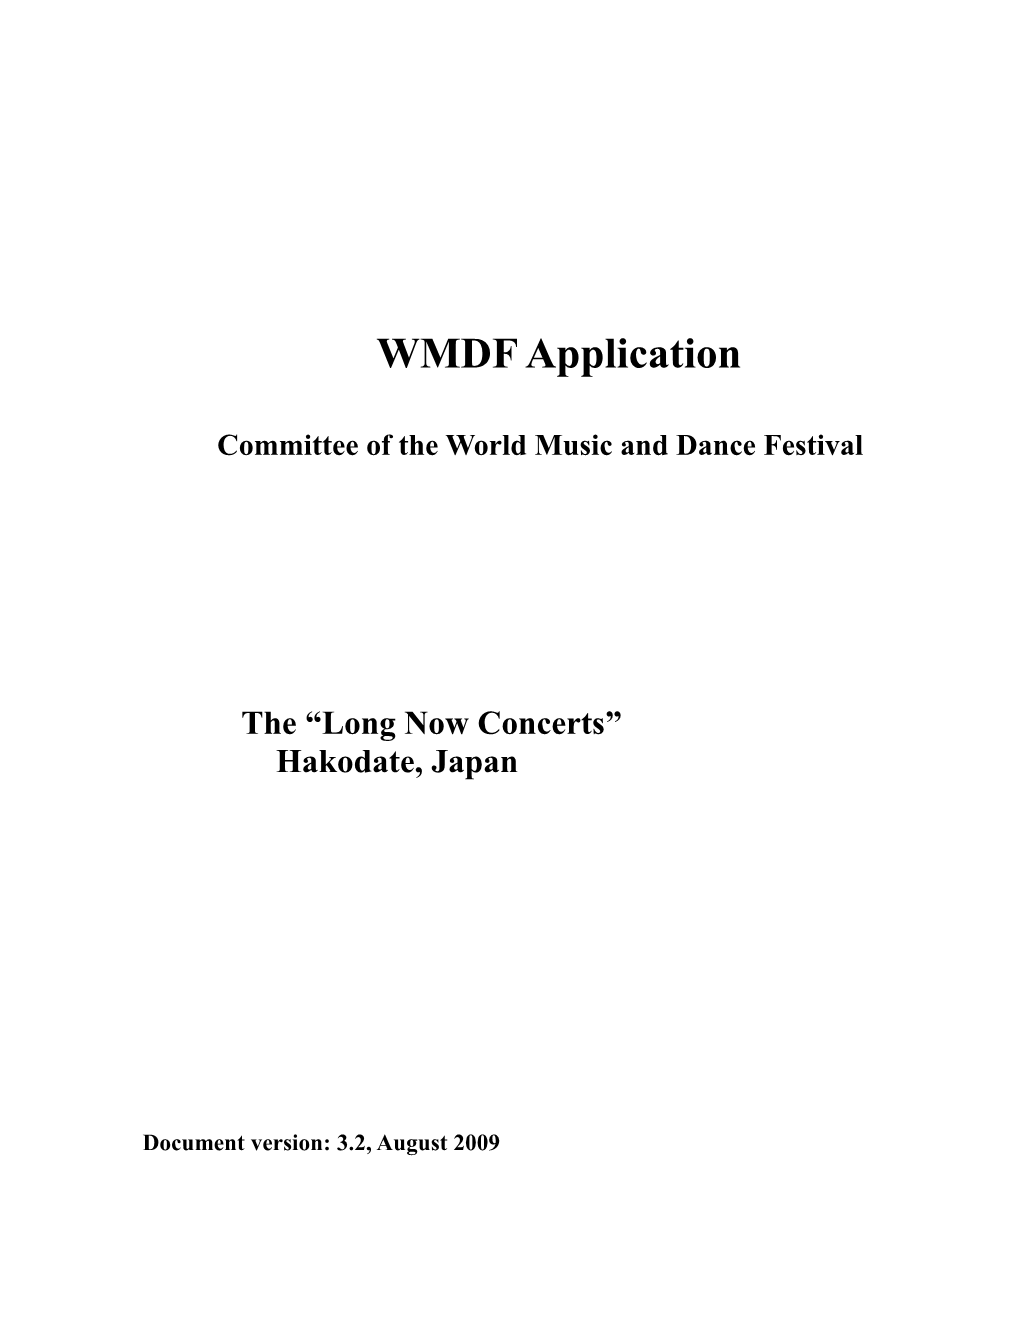 Committee of the World Music and Dance Festival